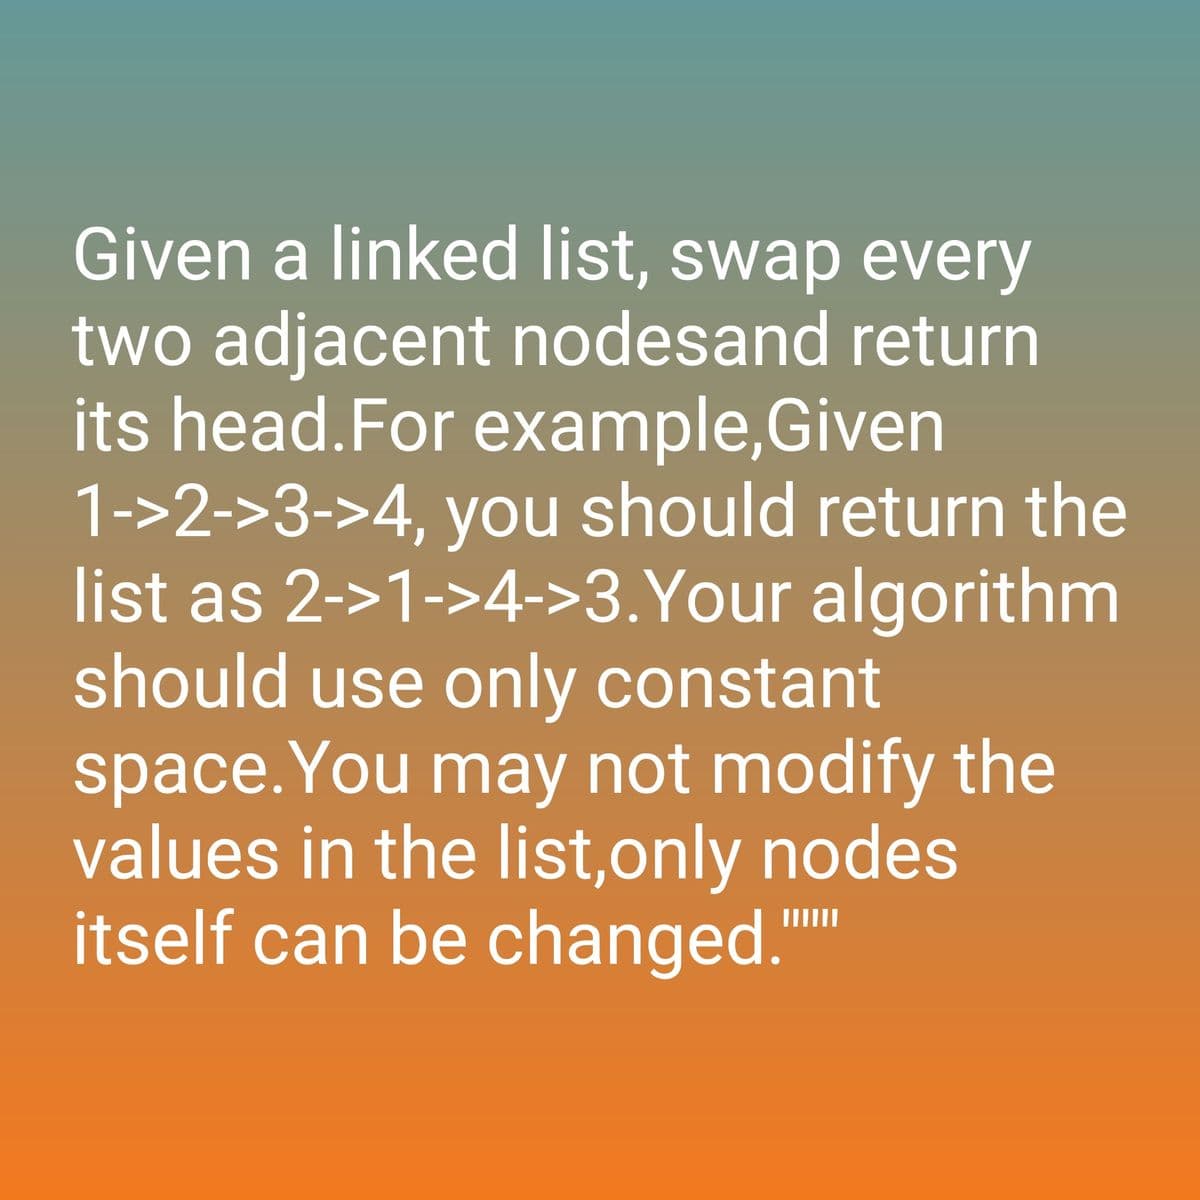 Given a linked list, swap every
two adjacent nodesand return
its head. For example, Given
1->2->3->4, you should return the
list as 2->1->4->3. Your algorithm
should use only constant
space. You may not modify the
values in the list,only nodes
itself can be changed.""